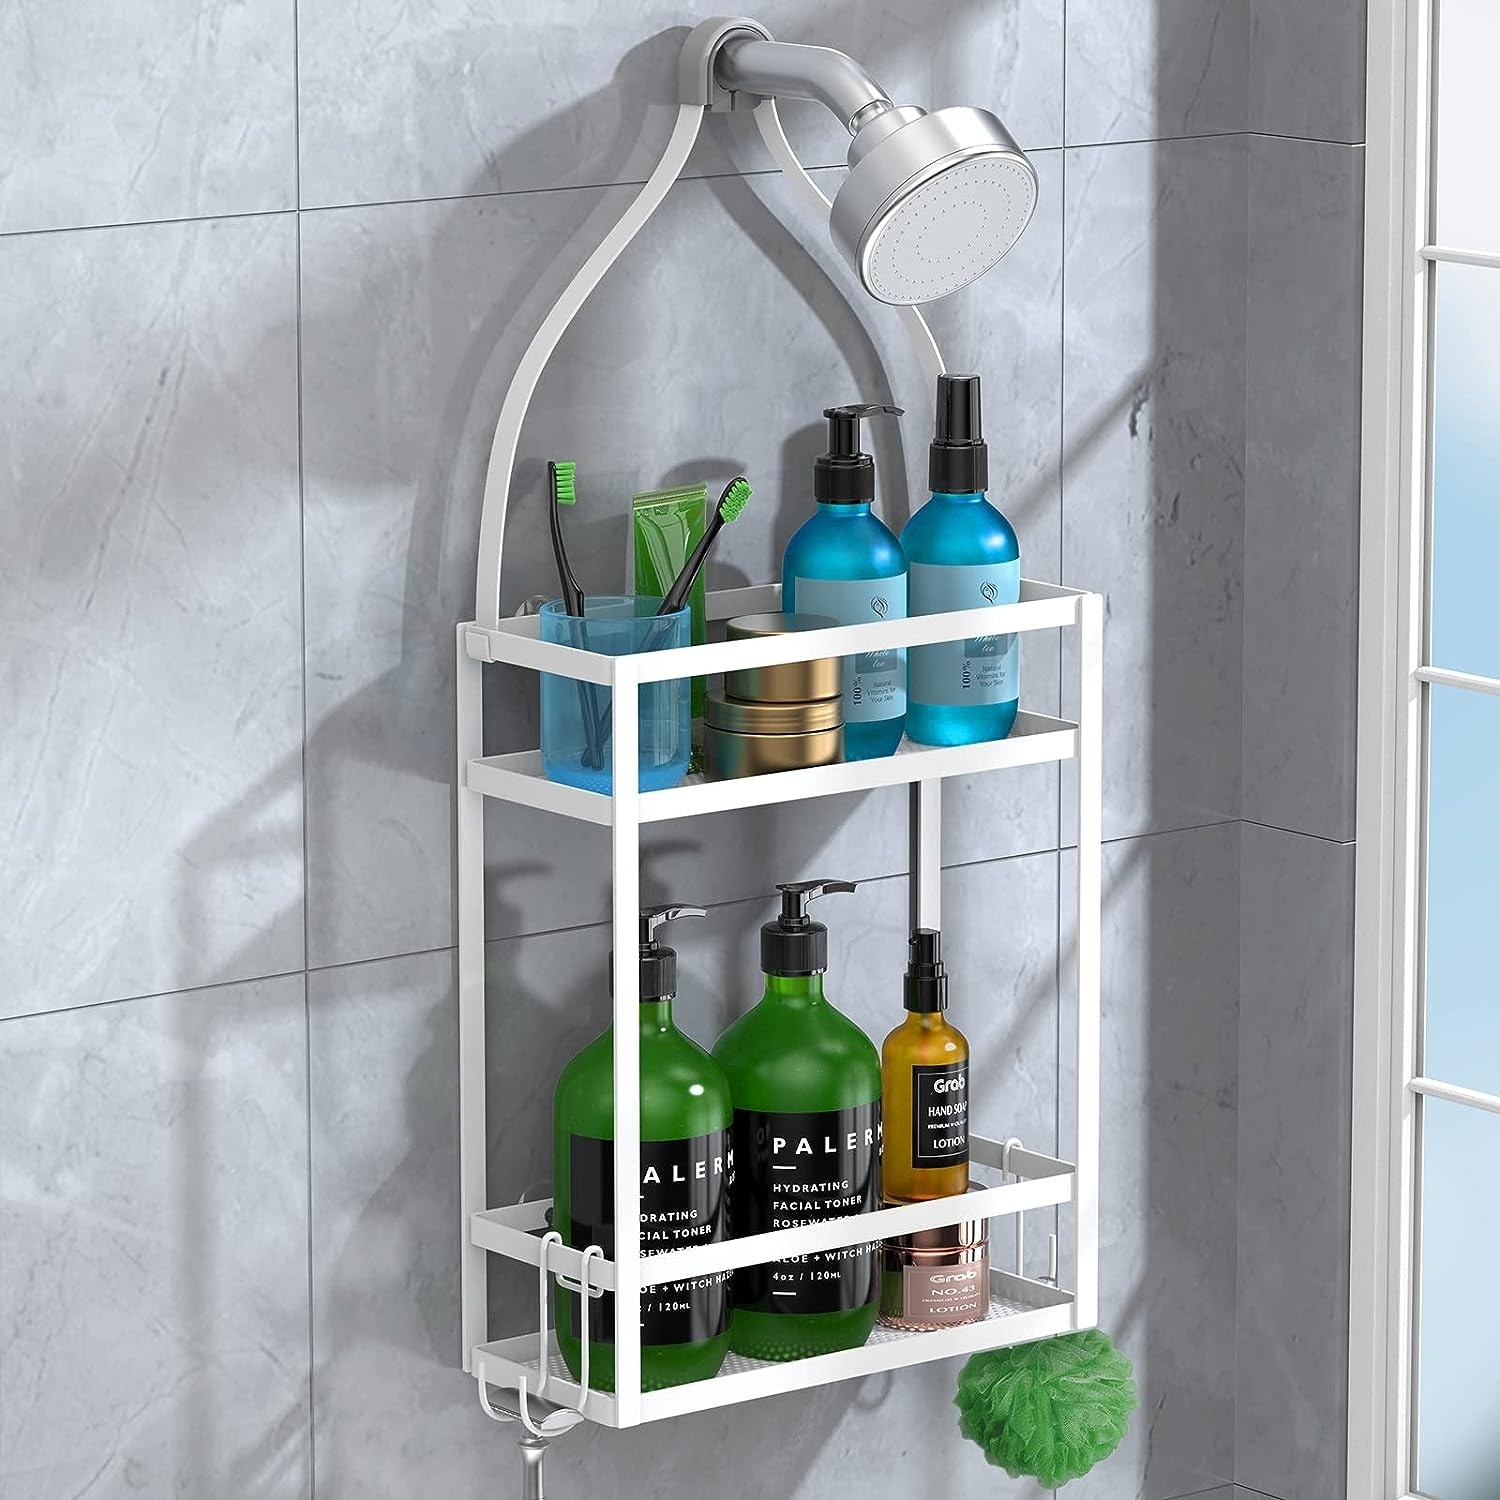 https://ak1.ostkcdn.com/images/products/is/images/direct/8799ad89a498542aff8b9d14d7503ea931e09dfa/Shower-Caddy-with-Hooks%2C-Mounting-Over-Shower-Head-Or-Door.jpg